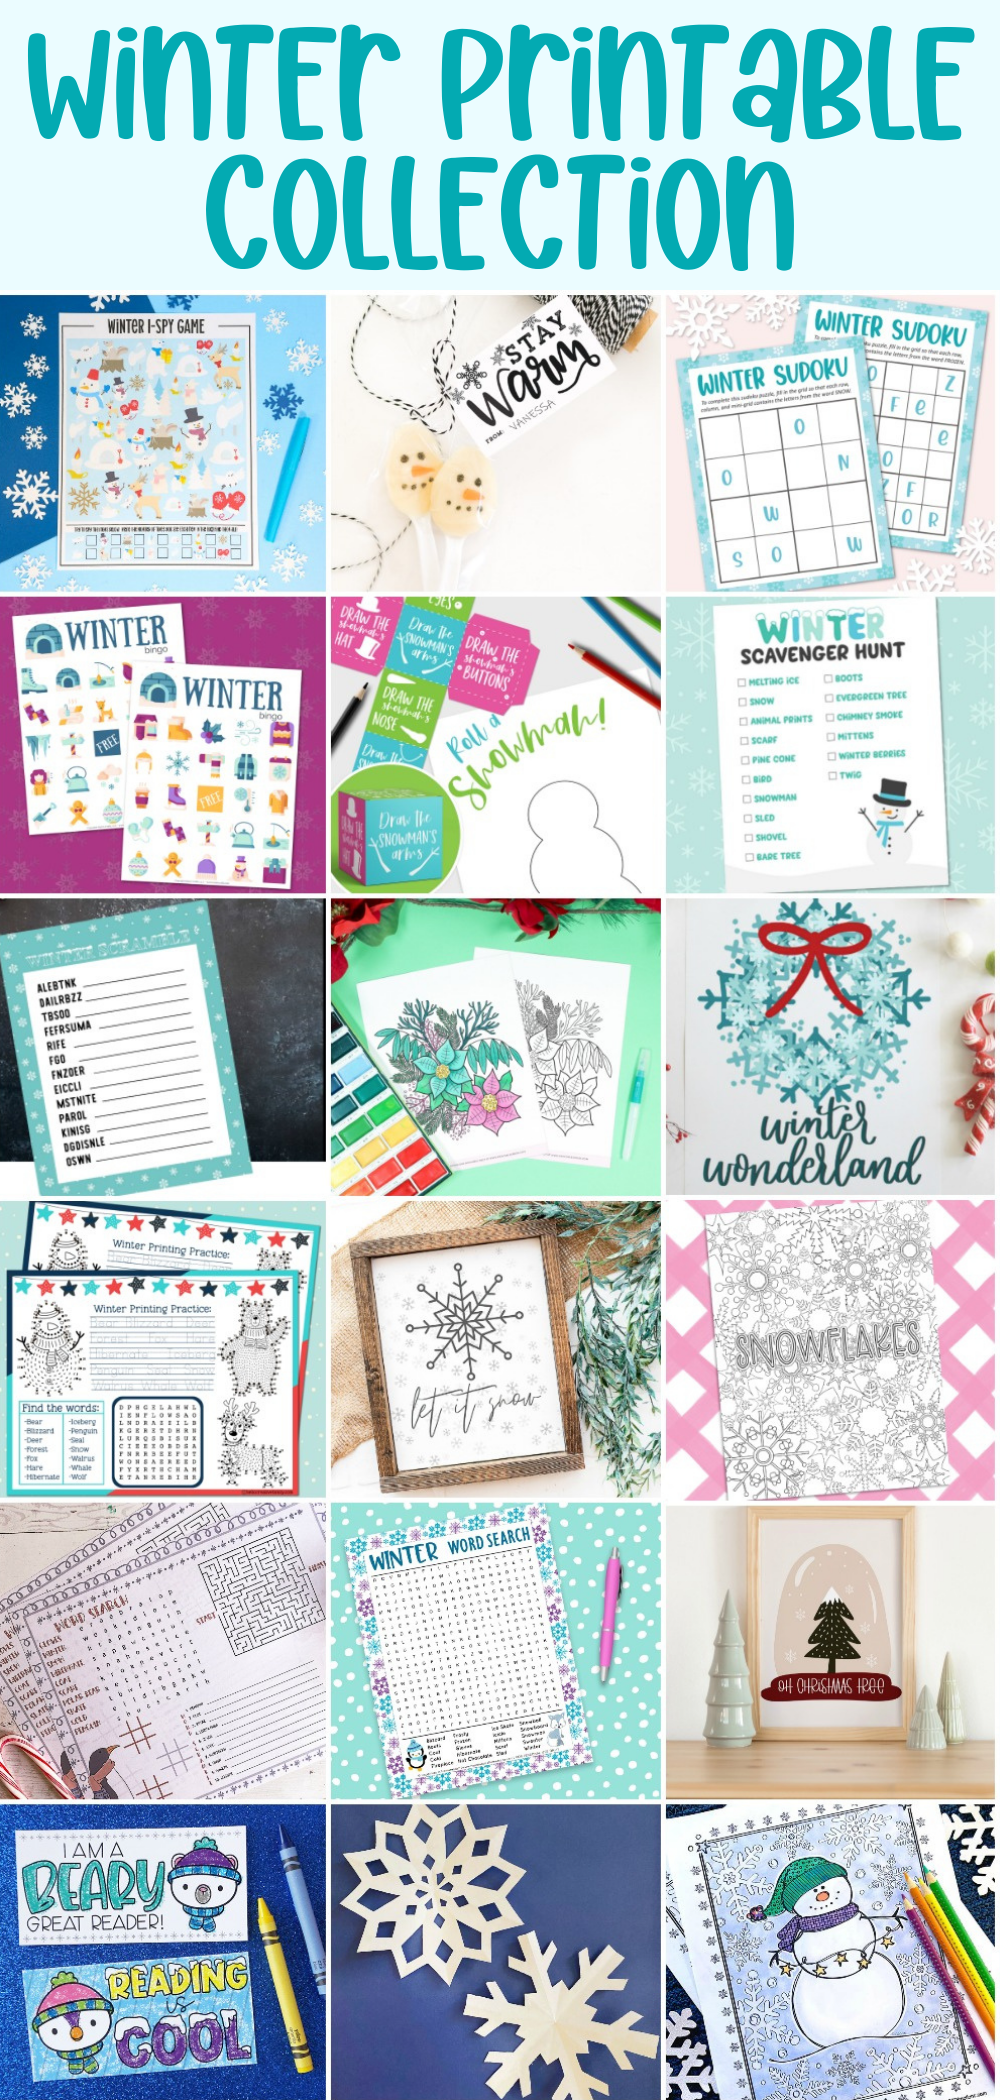 https://www.happygoluckyblog.com/wp-content/uploads/2020/12/Winter-Printable-Collection-1.png